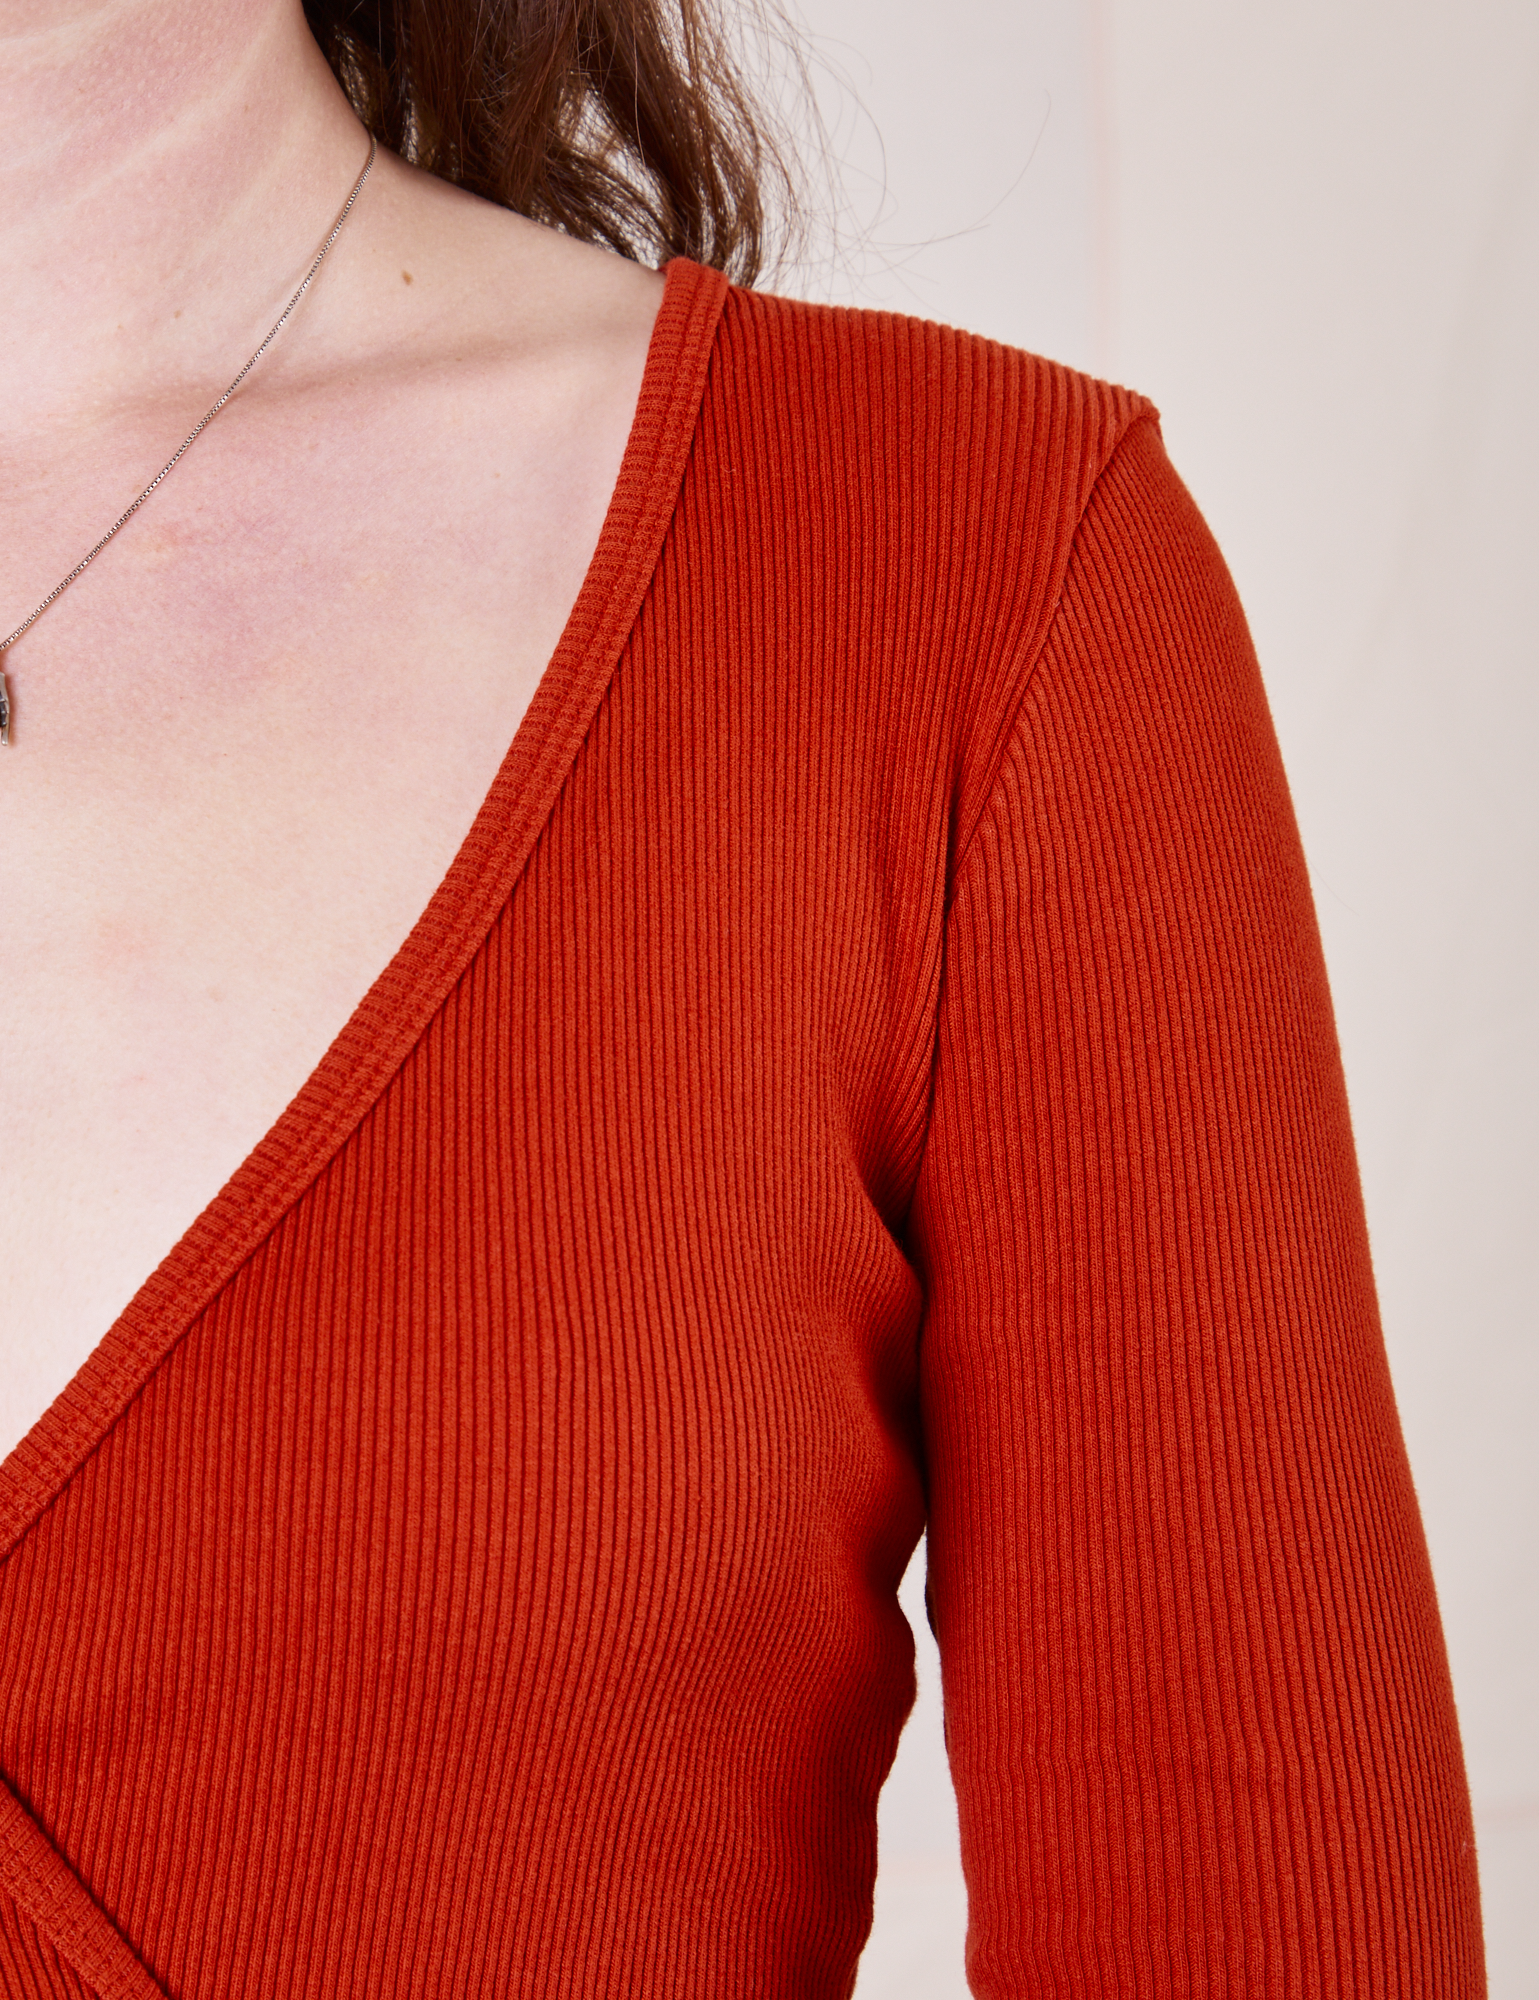 Wrap Top in Paprika front close up on Alex